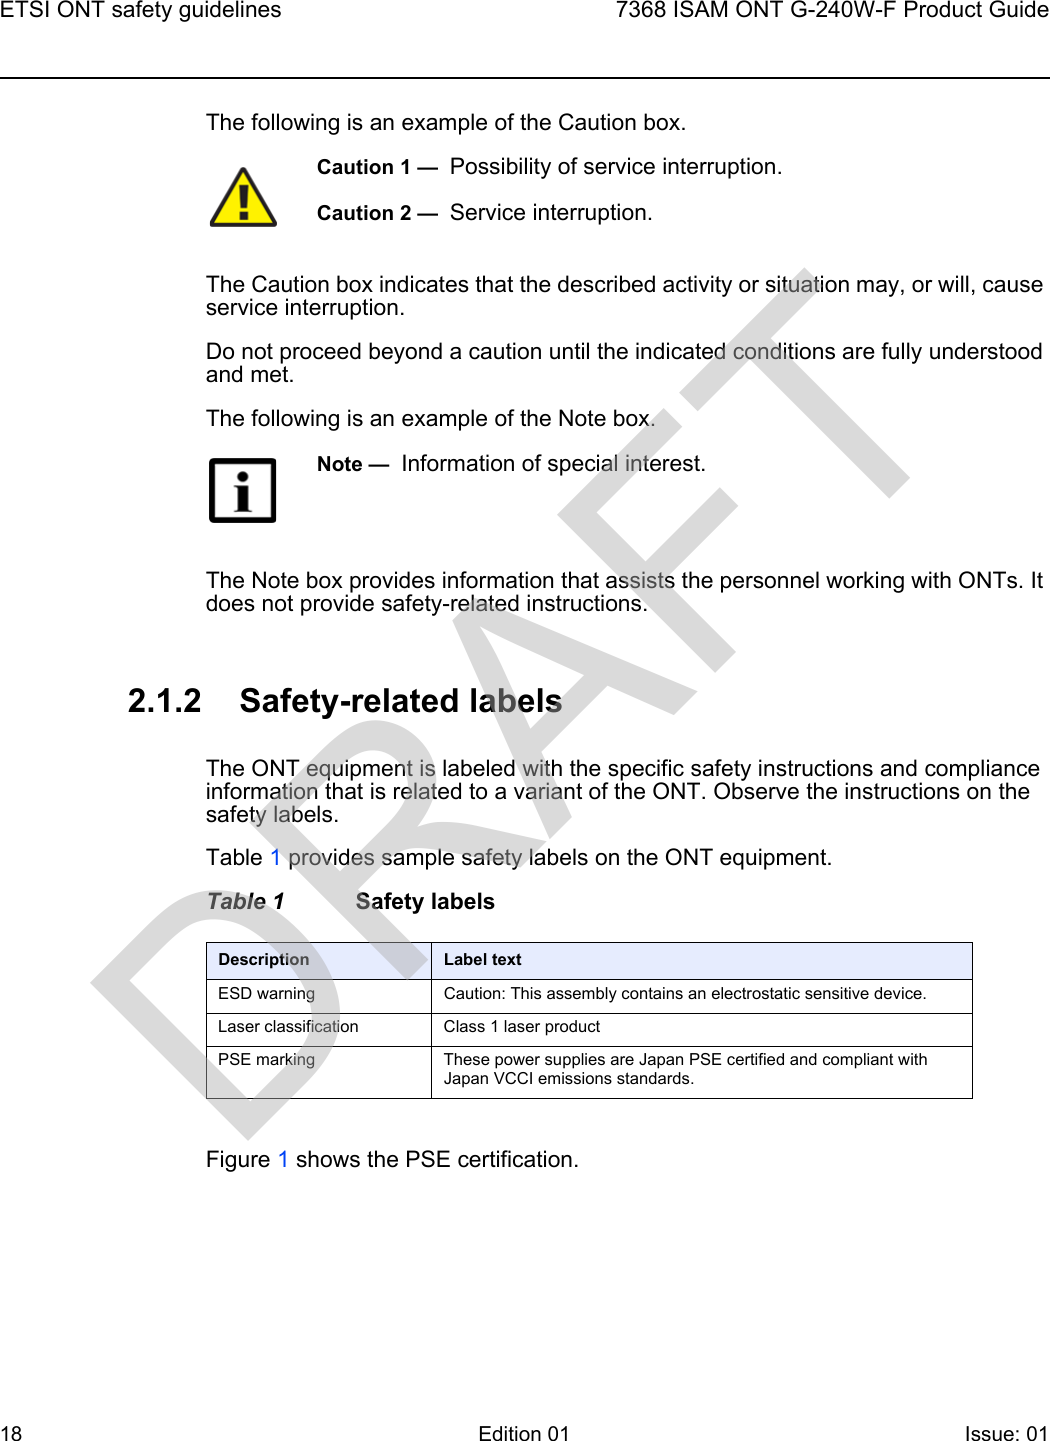 ETSI ONT safety guidelines187368 ISAM ONT G-240W-F Product GuideEdition 01 Issue: 01 The following is an example of the Caution box.The Caution box indicates that the described activity or situation may, or will, cause service interruption.Do not proceed beyond a caution until the indicated conditions are fully understood and met.The following is an example of the Note box.The Note box provides information that assists the personnel working with ONTs. It does not provide safety-related instructions.2.1.2 Safety-related labelsThe ONT equipment is labeled with the specific safety instructions and compliance information that is related to a variant of the ONT. Observe the instructions on the safety labels.Table 1 provides sample safety labels on the ONT equipment.Table 1 Safety labelsFigure 1 shows the PSE certification.Caution 1 —  Possibility of service interruption.Caution 2 —  Service interruption.Note —  Information of special interest.Description Label textESD warning Caution: This assembly contains an electrostatic sensitive device.Laser classification Class 1 laser productPSE marking These power supplies are Japan PSE certified and compliant with Japan VCCI emissions standards.DRAFT